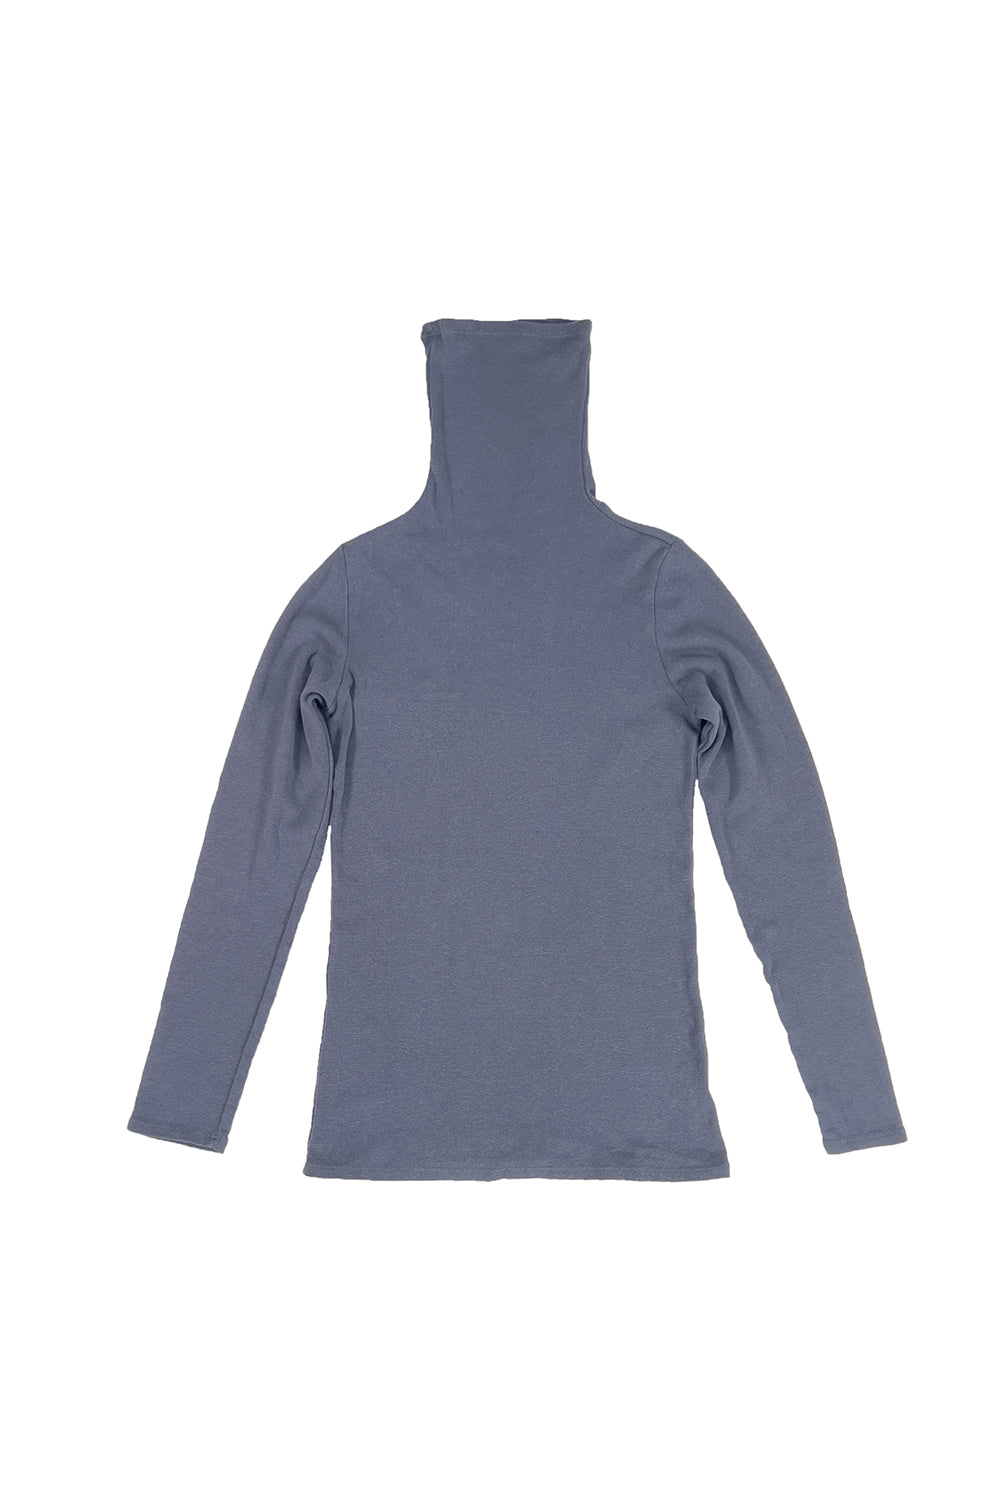 Whidbey Turtleneck | Jungmaven Hemp Clothing & Accessories / Color: Diesel Gray